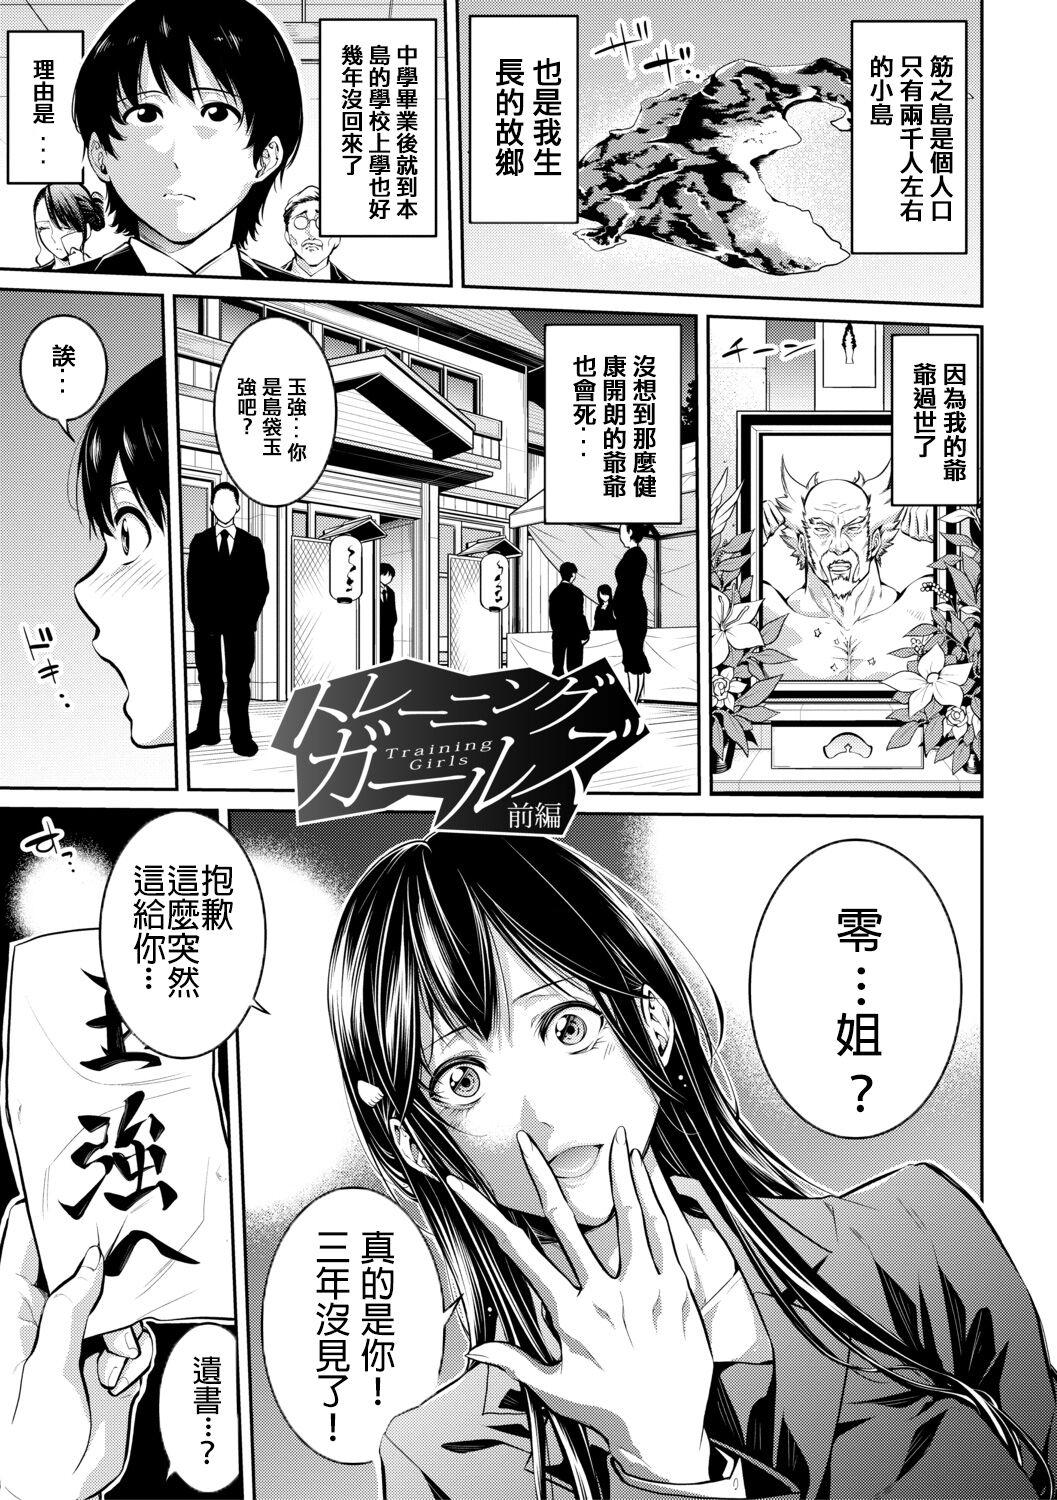 Bucetinha [Brother Pierrot] Onee-san to Ase Mamire Ch. 1-5 [Chinese] [Digital] Gaybukkake - Picture 3